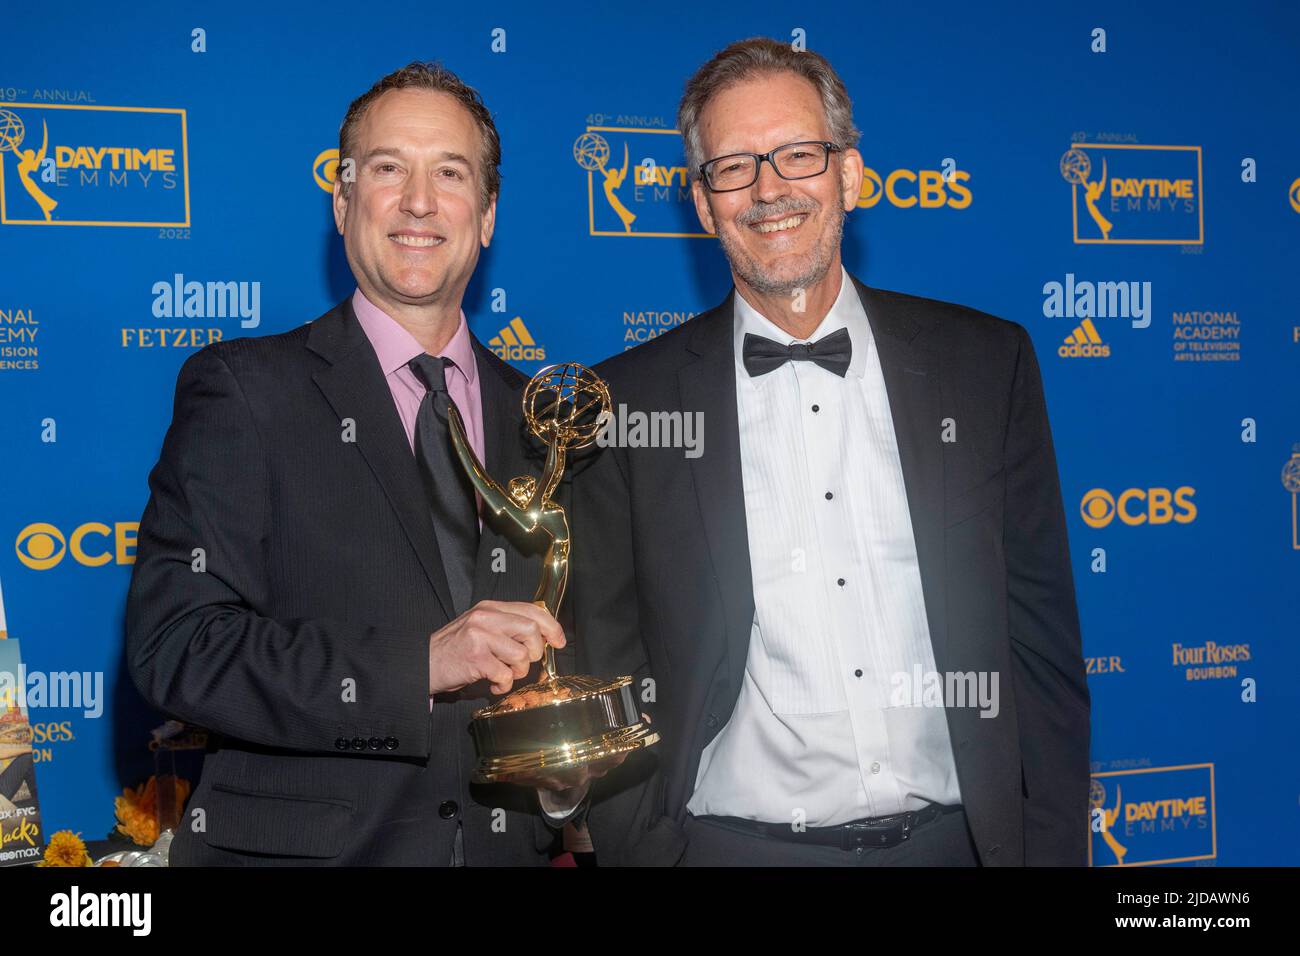 Pasadena, California, USA. 18th June, 2022. Steven Latham, Conrad Stanley attend 49th Daytime Emmys Creative Arts and Lifestlyle Ceremony Gifting at Pasadena Convention Center, Pasadena, CA on June 18, 2022 Credit: Eugene Powers/Alamy Live News Stock Photo